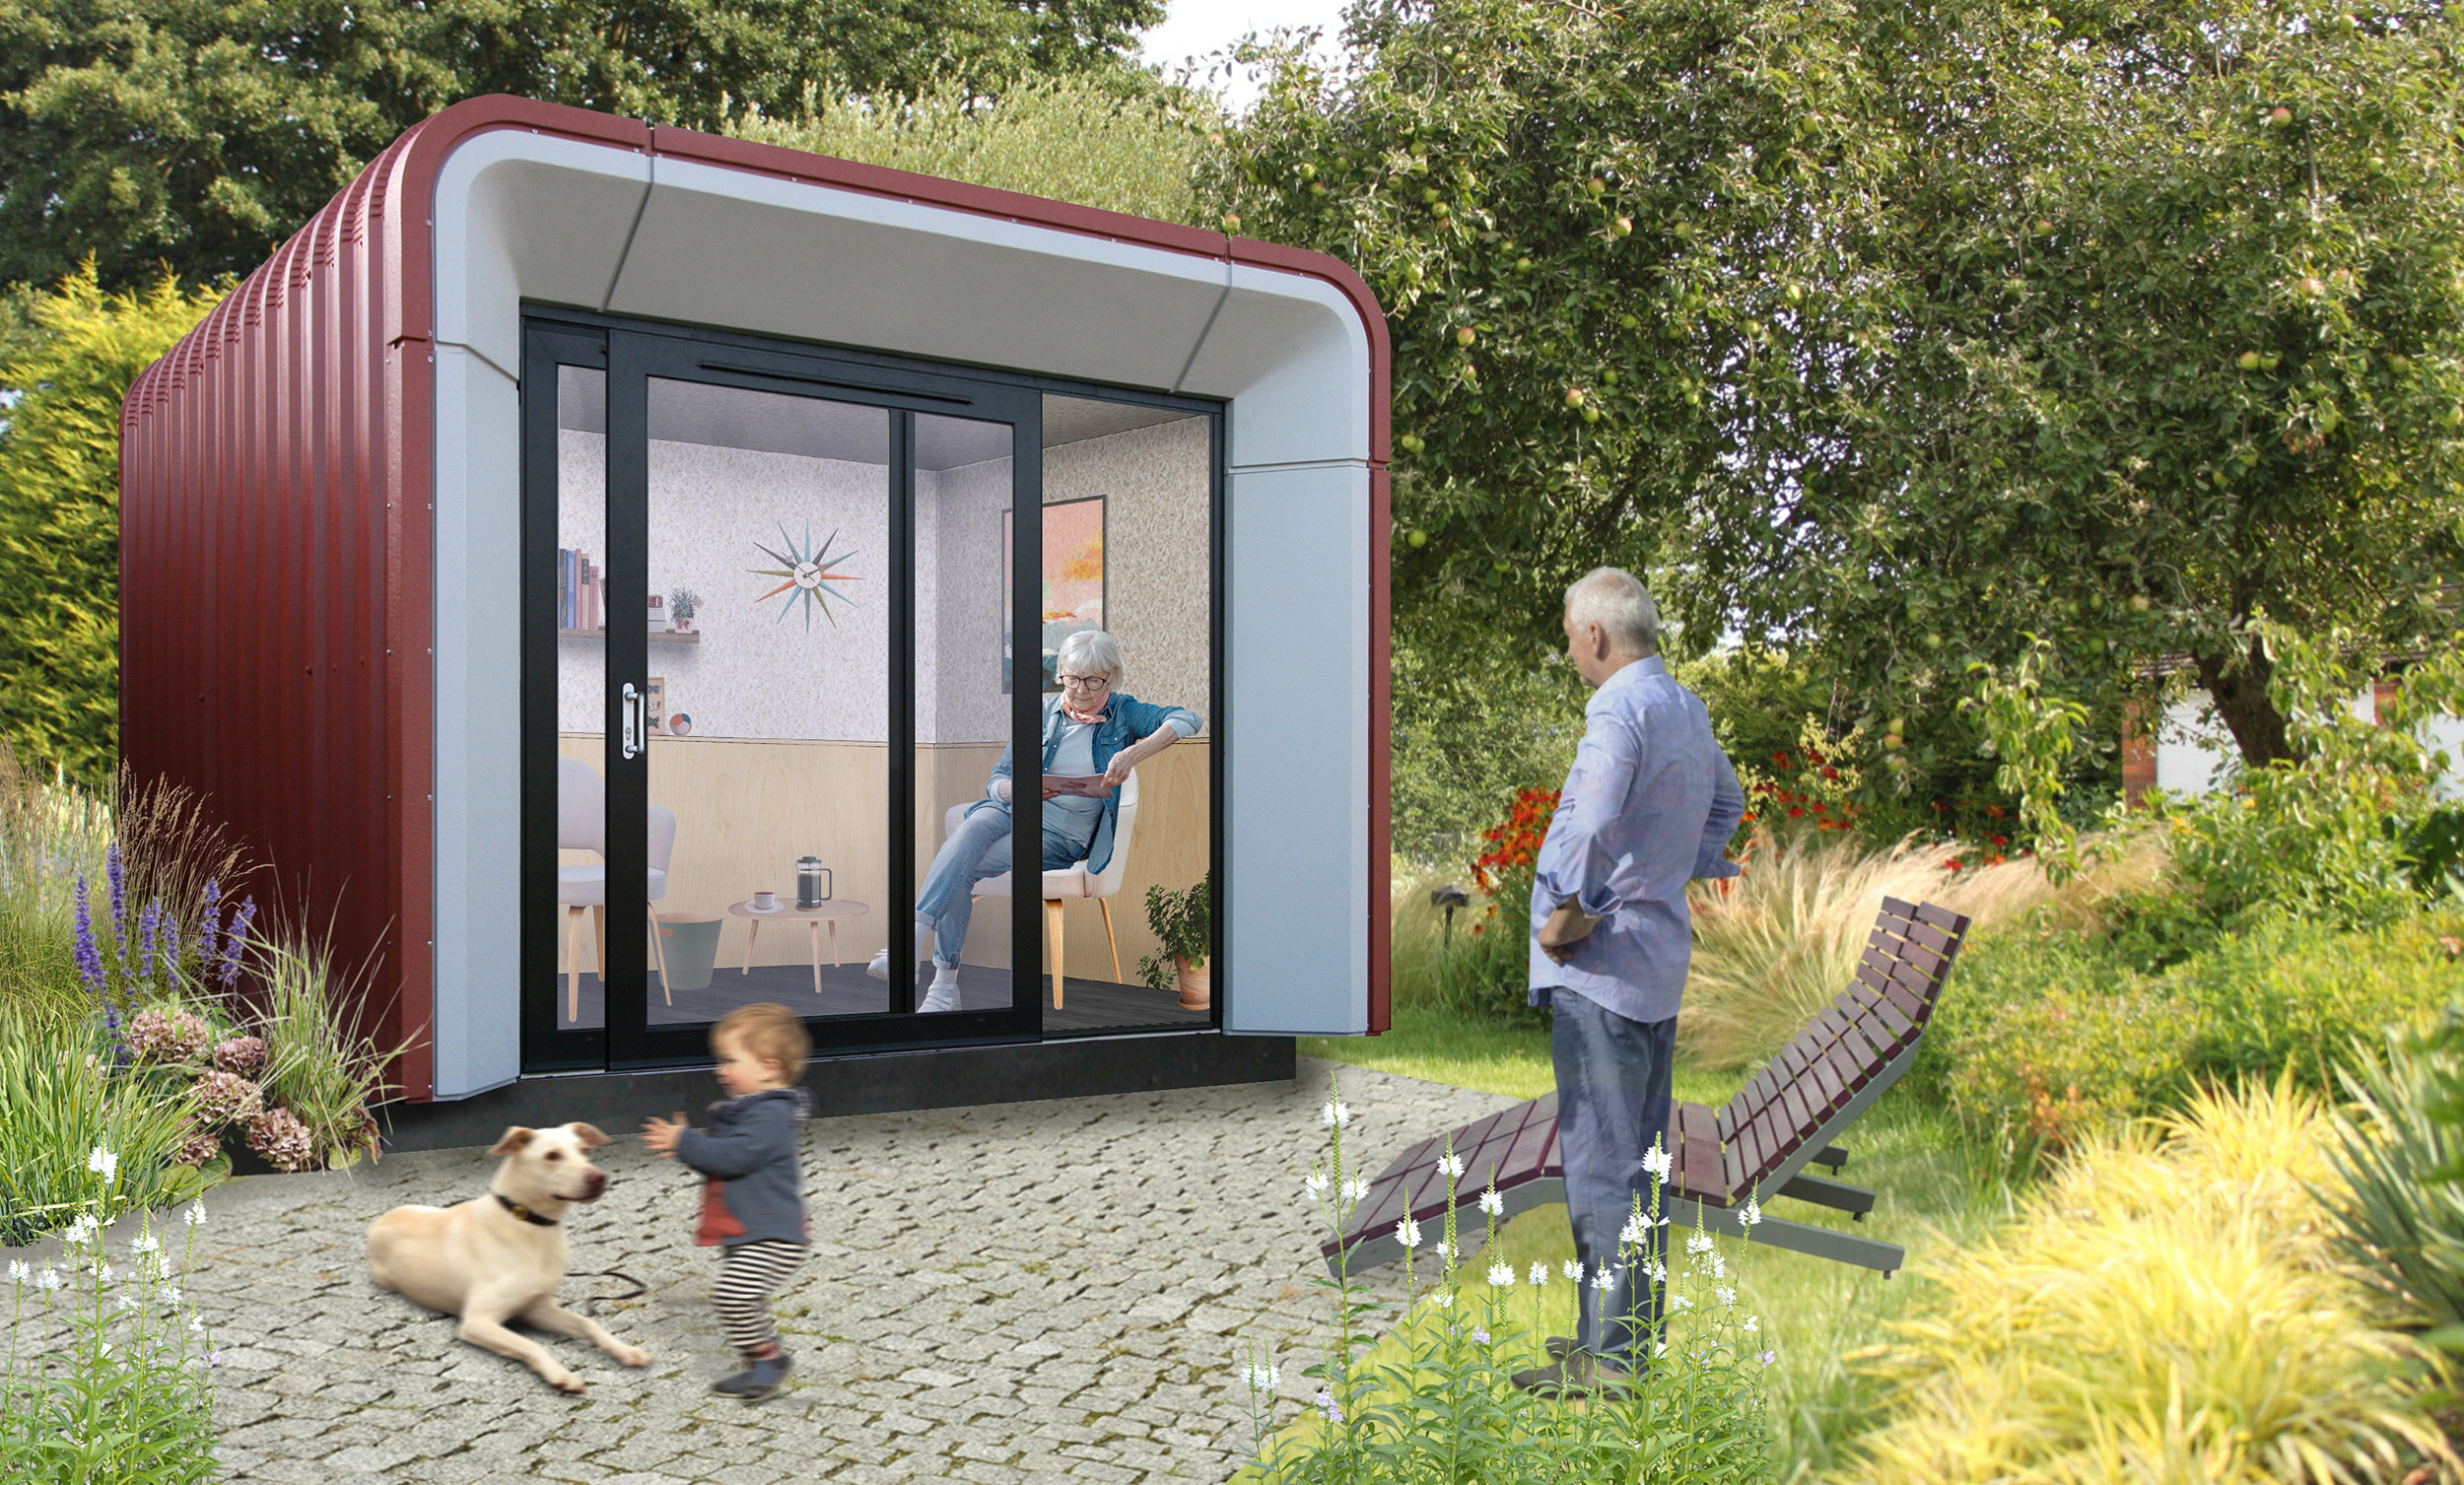 modern garden room with grandparents, child and pet dog